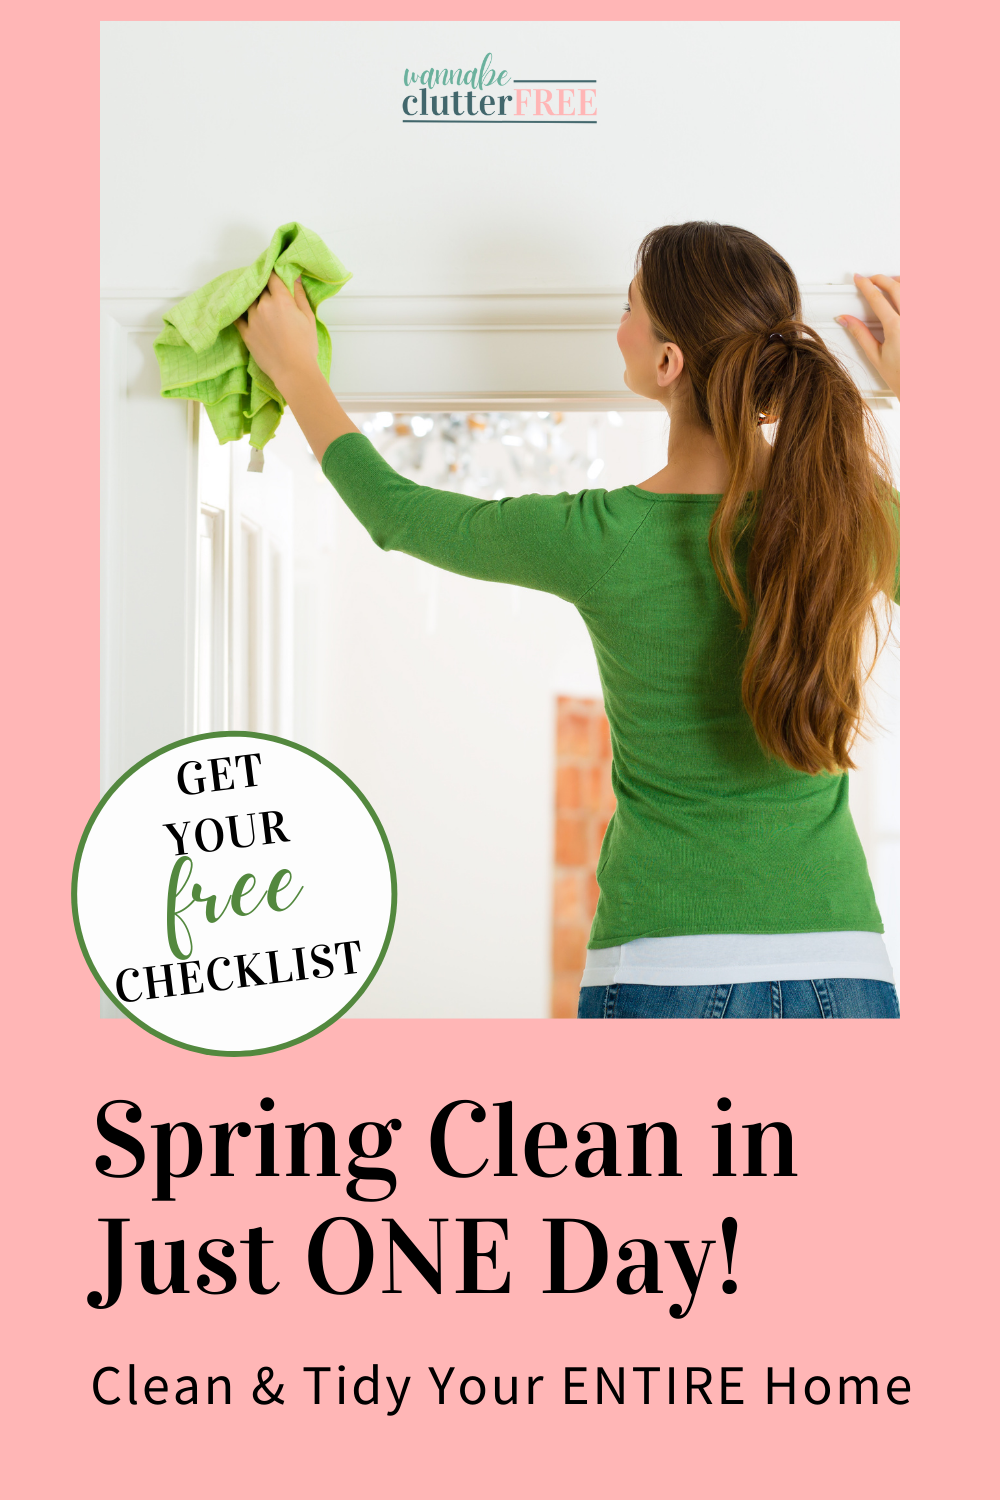 Spring Clean in Just ONE Day!